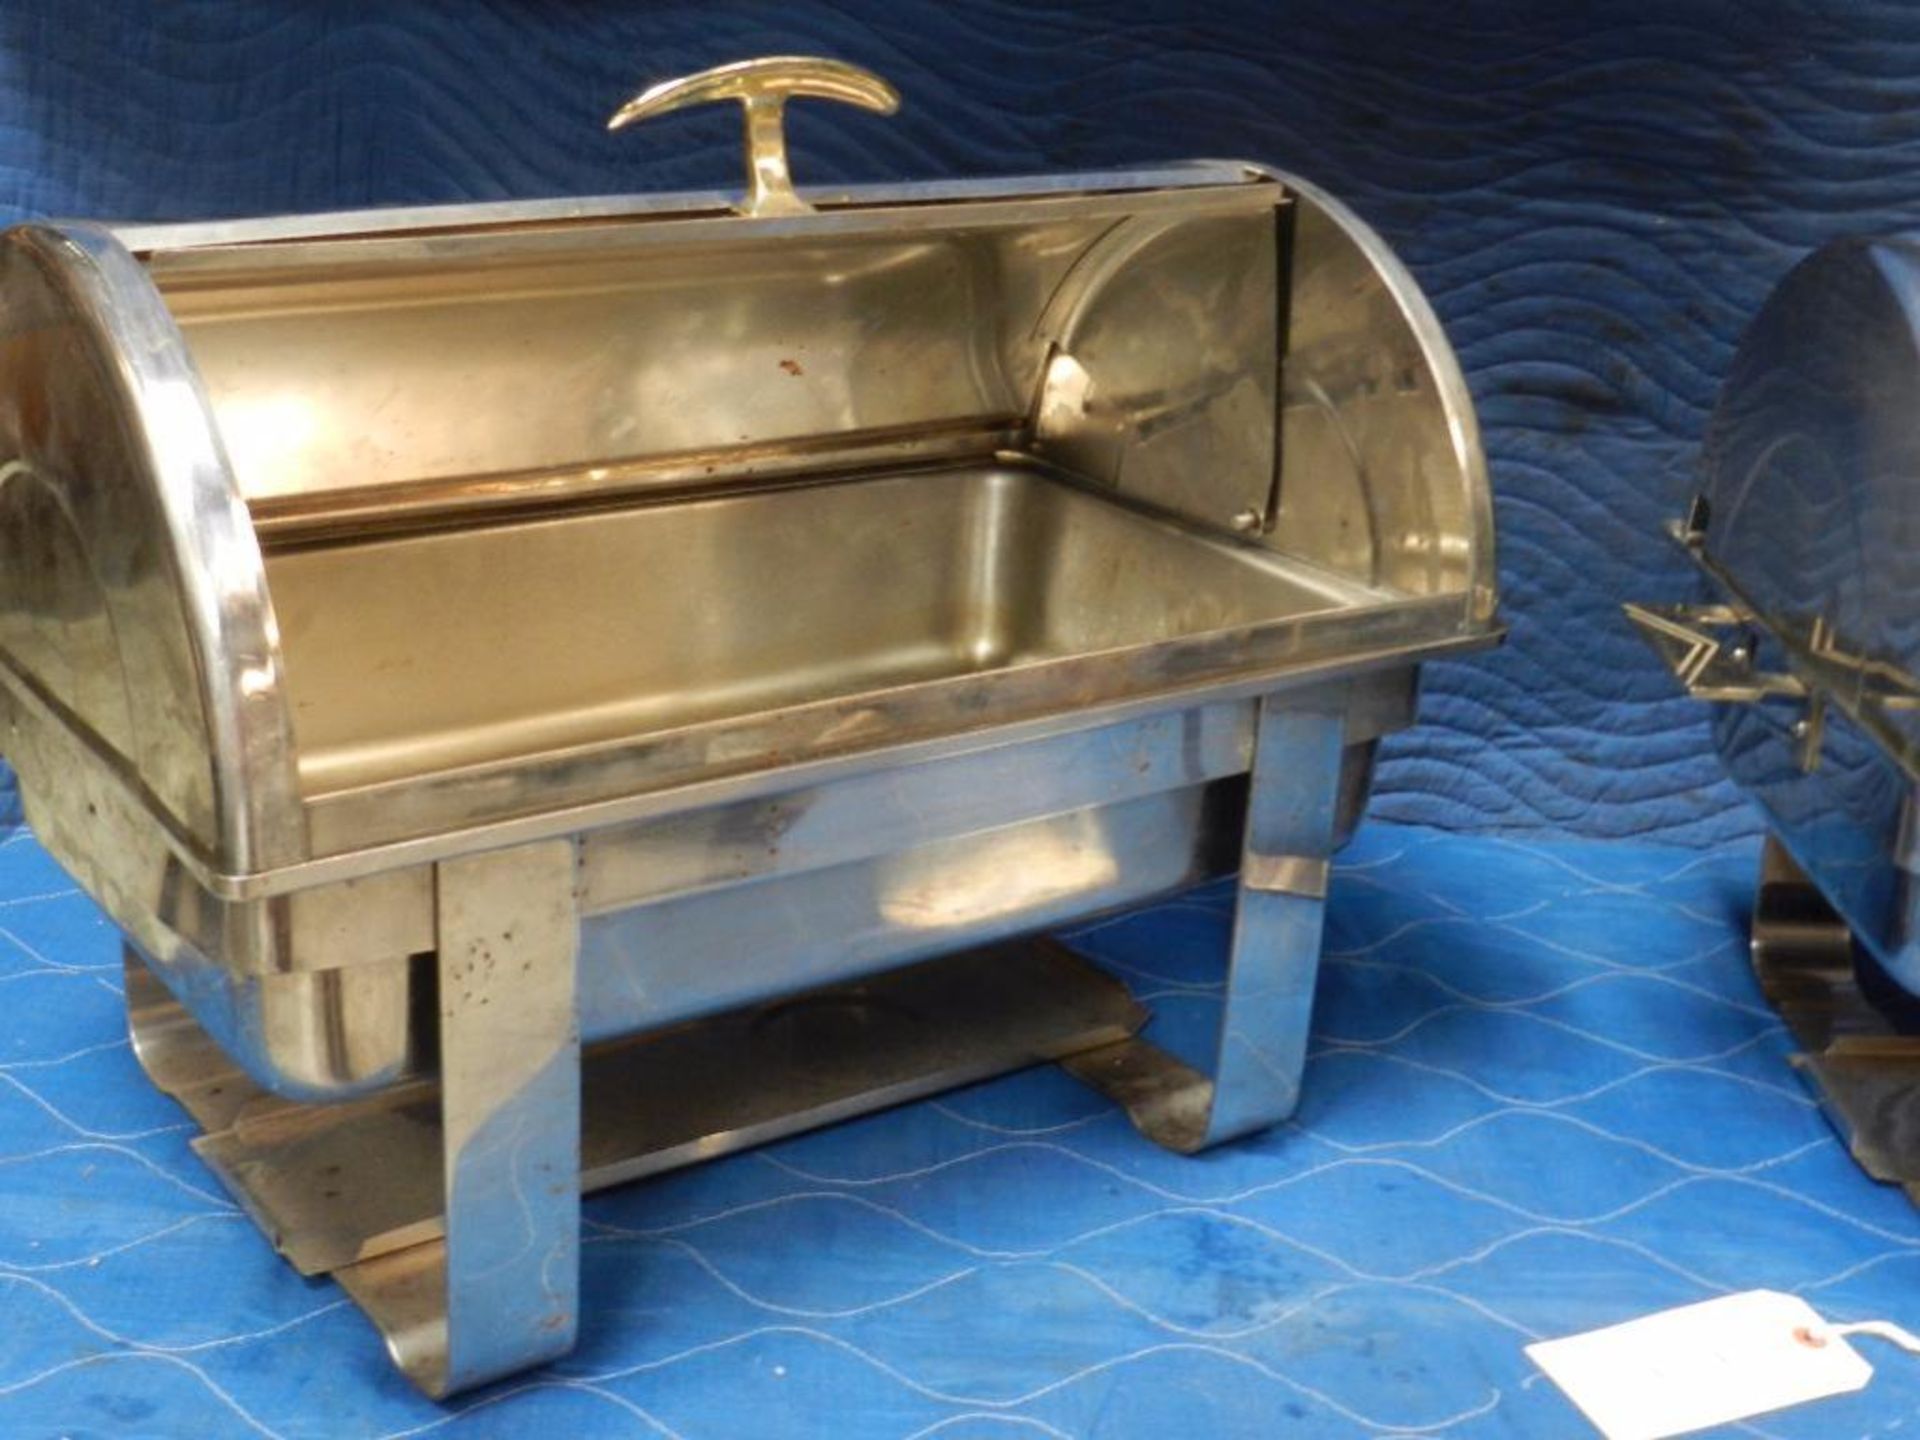 Chafing dish raised base side roll top. votive type burners. seems stainless steel. Qty two. Bid ind